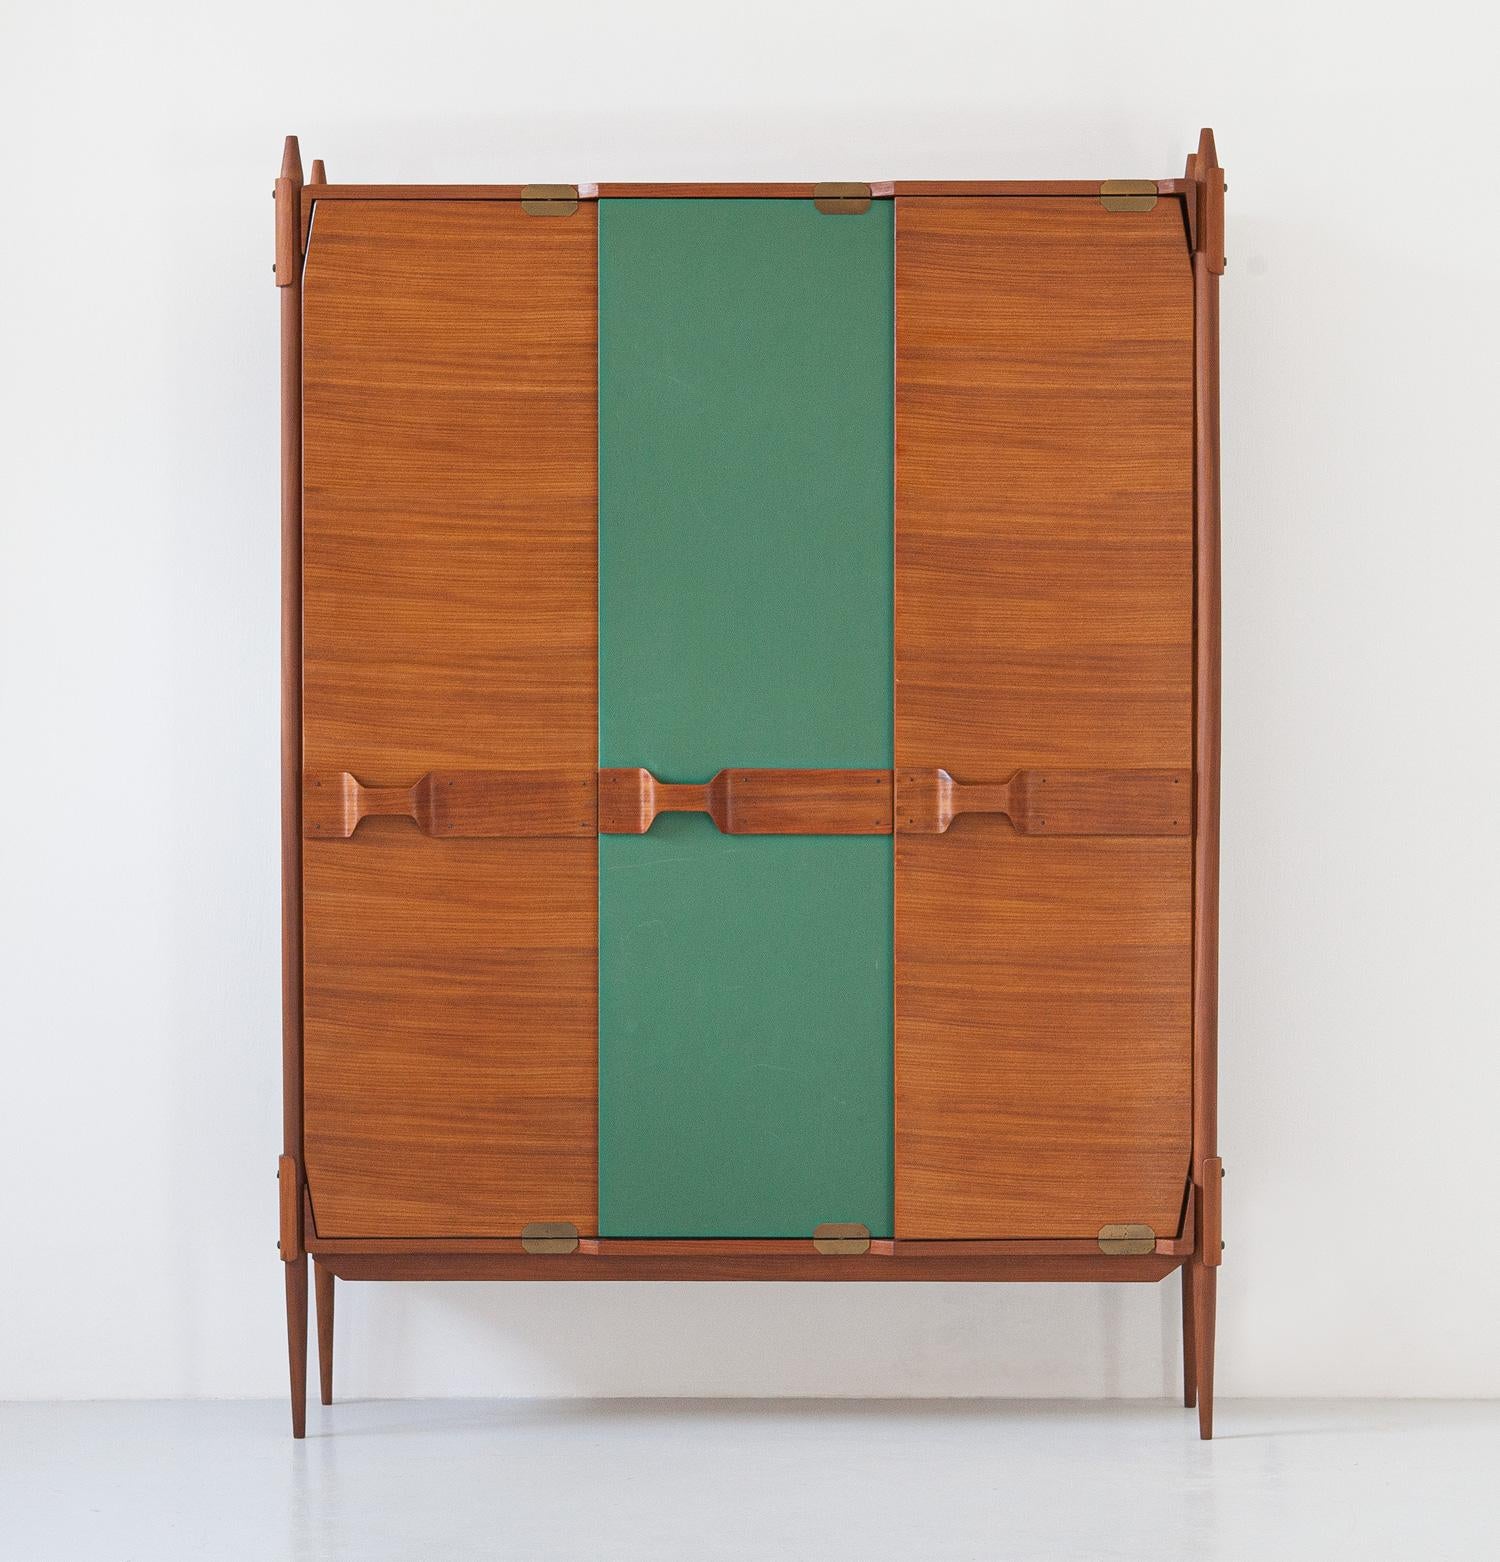 Italian Wardrobe, teak, green skay, brass, 1950s

This incredible piece of mid-century modern Italian design boasts ultra modern lines along with technical details of high Italian carpentry.

it has six brass and teak wood hangers. The three